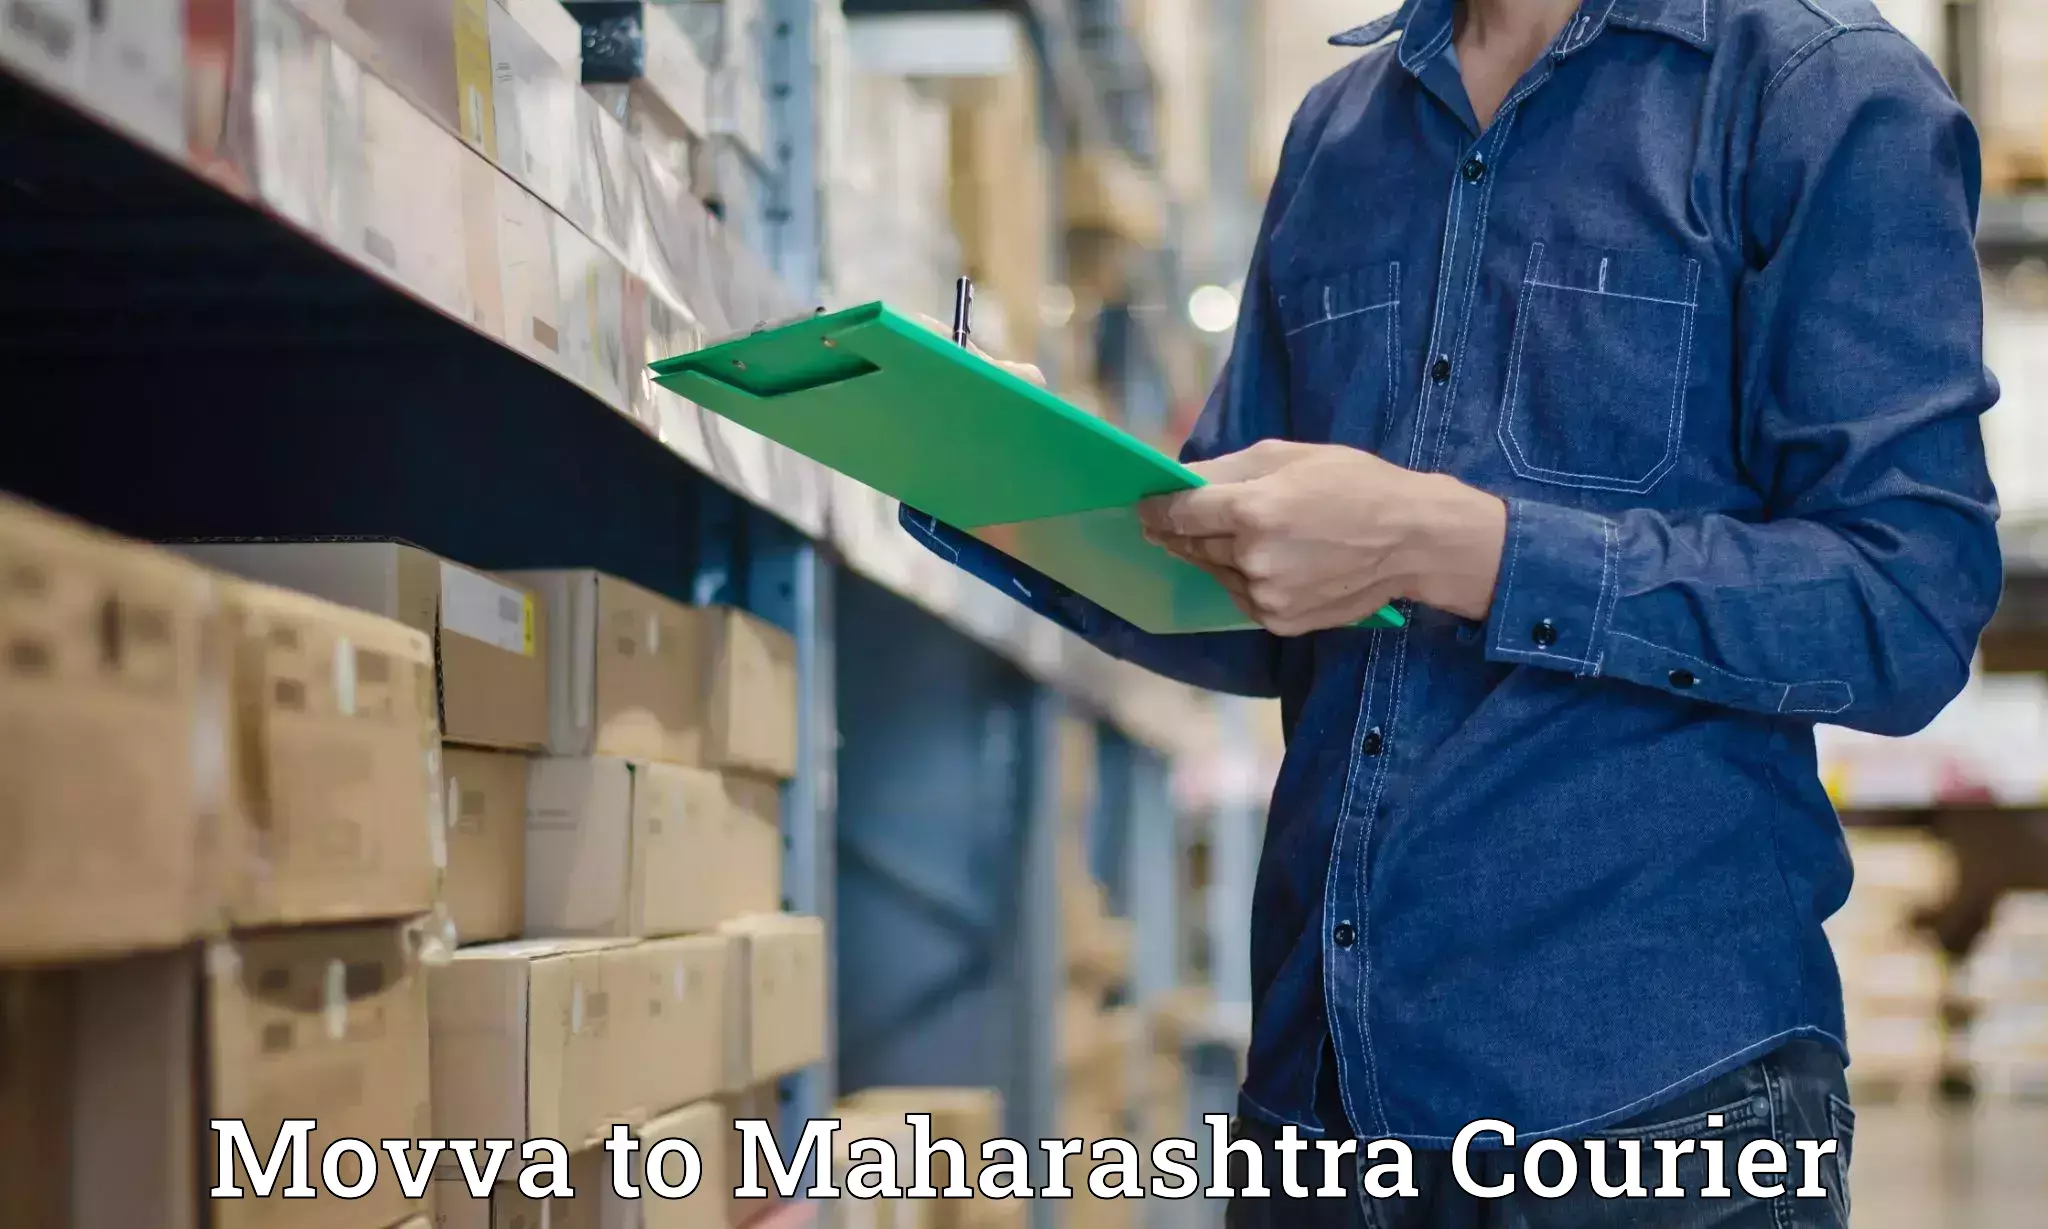 Courier service partnerships Movva to Ghatanji